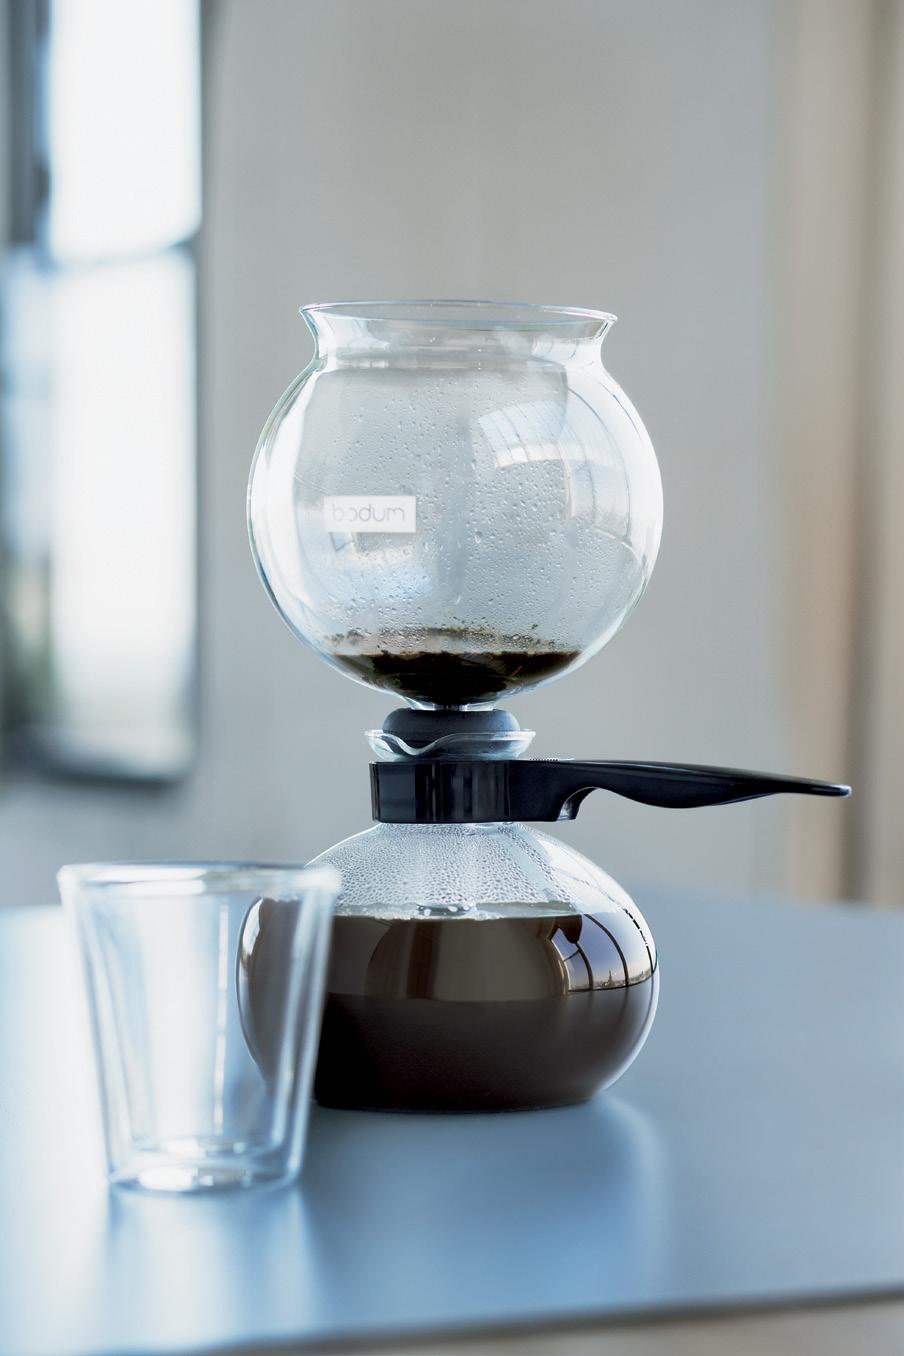 4 70 years of Visionary Innovation 8 BODUM s Portuguesa 13 Coffee 16 Coffee Maker Comparison 17 Coffee Brewing Methods 22 Coffee-House Style Drinks 36 Parts of The French Press Coffee Maker 37 Guide